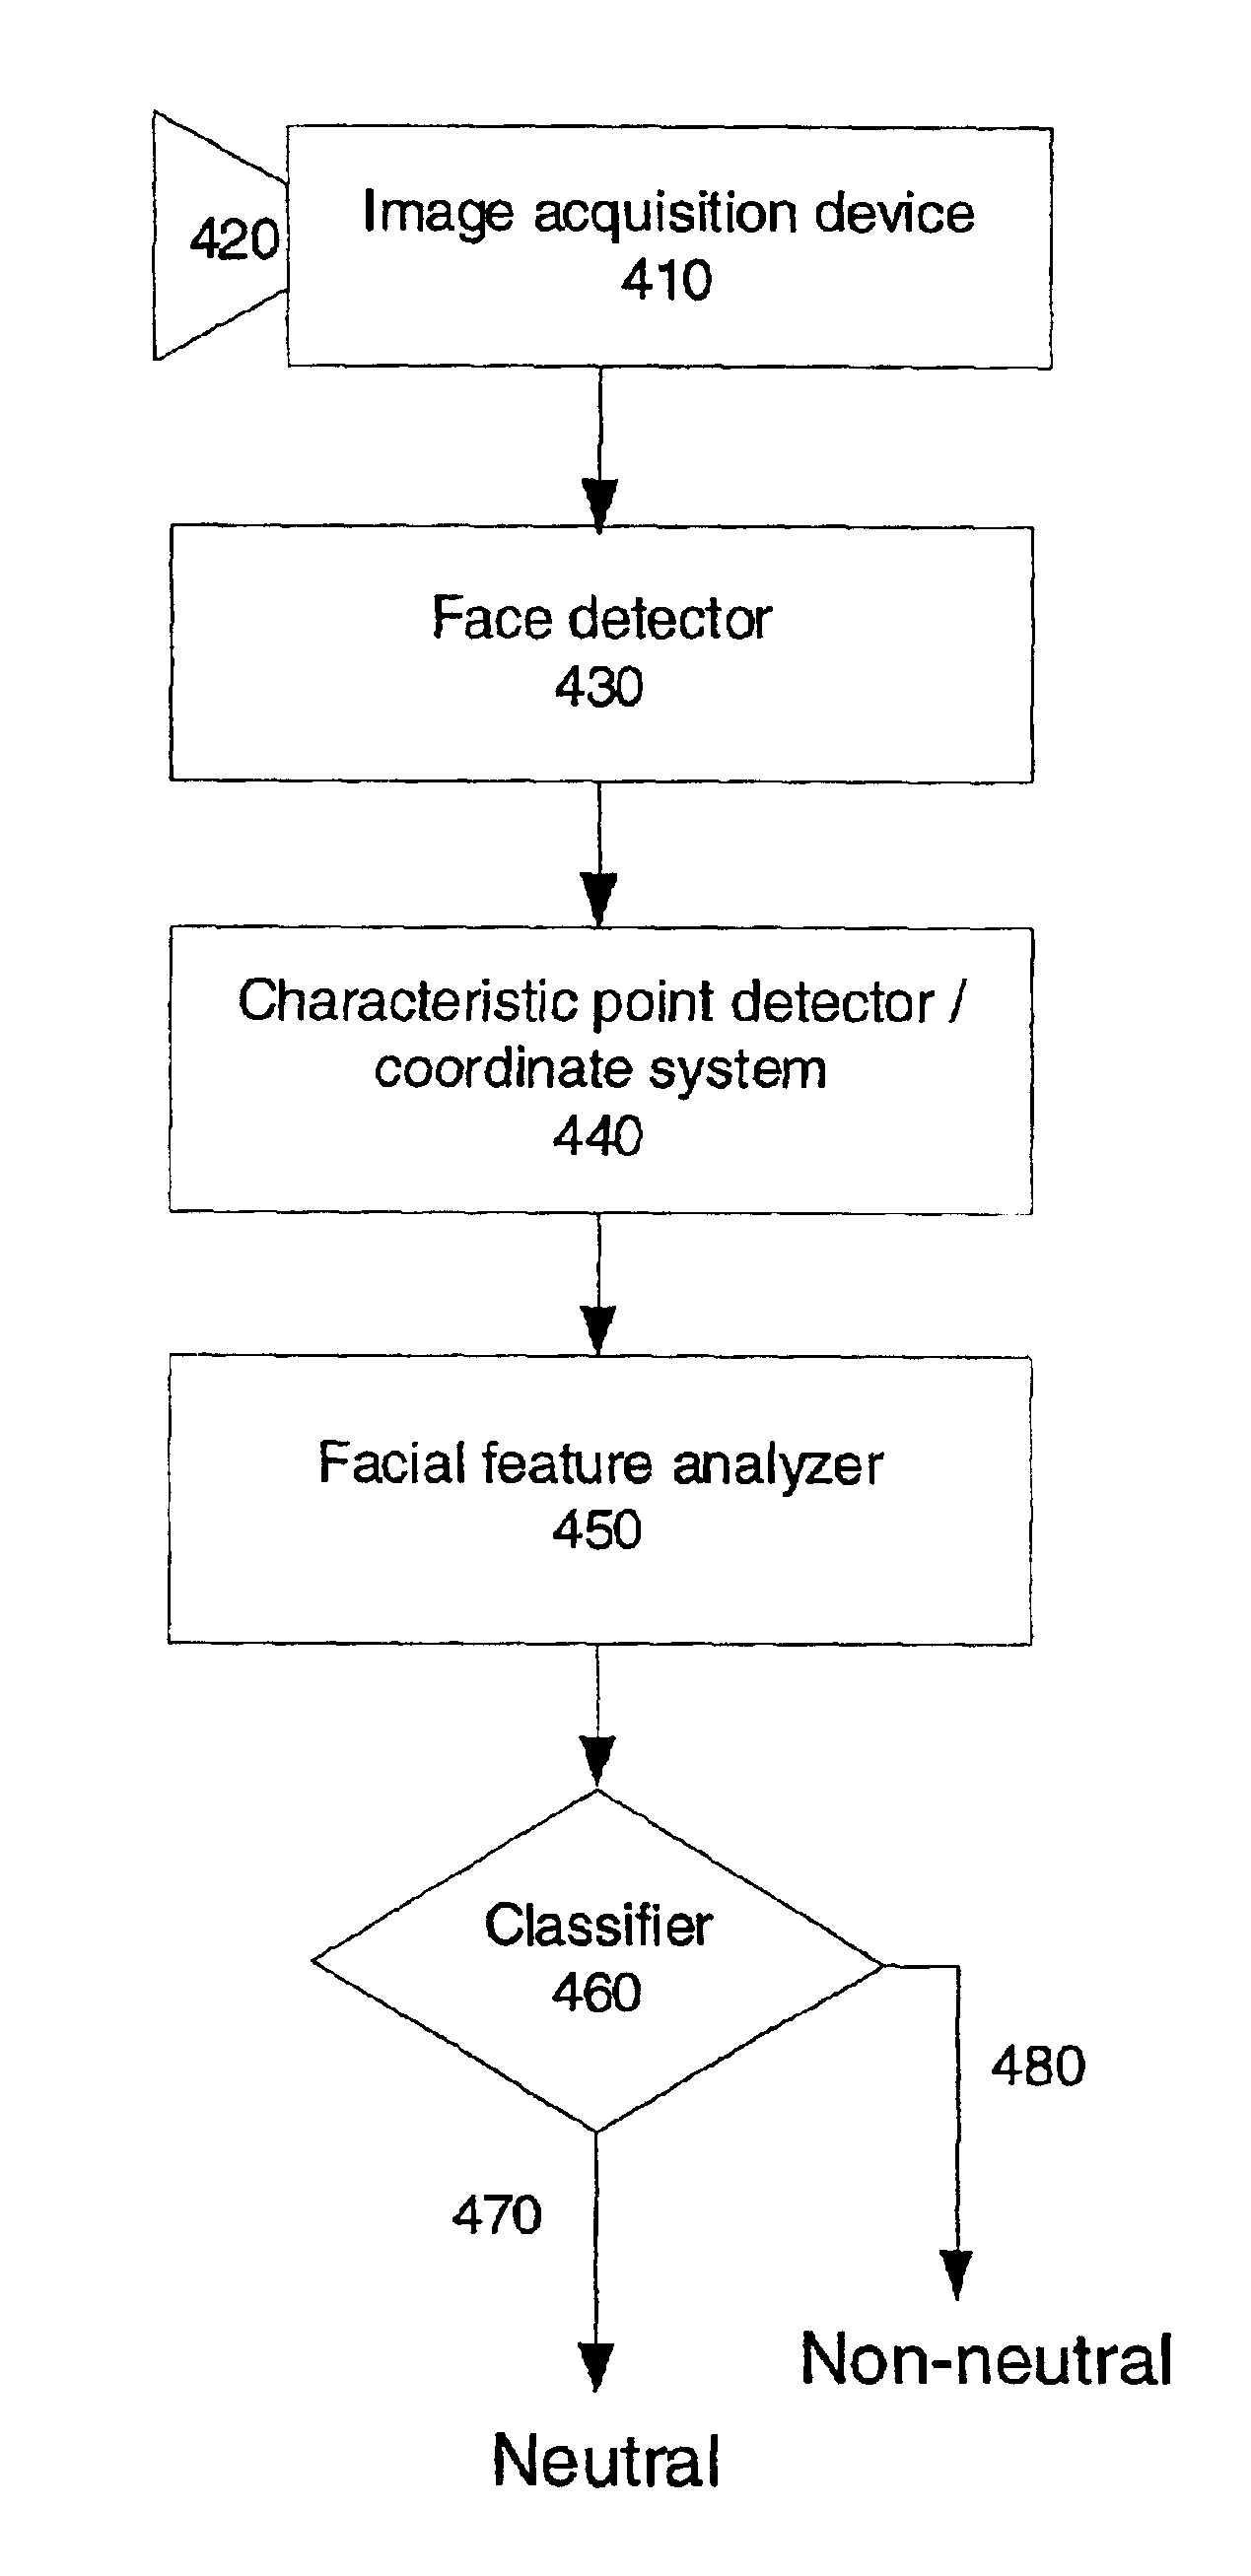 System and method for automatically detecting neutral expressionless faces in digital images